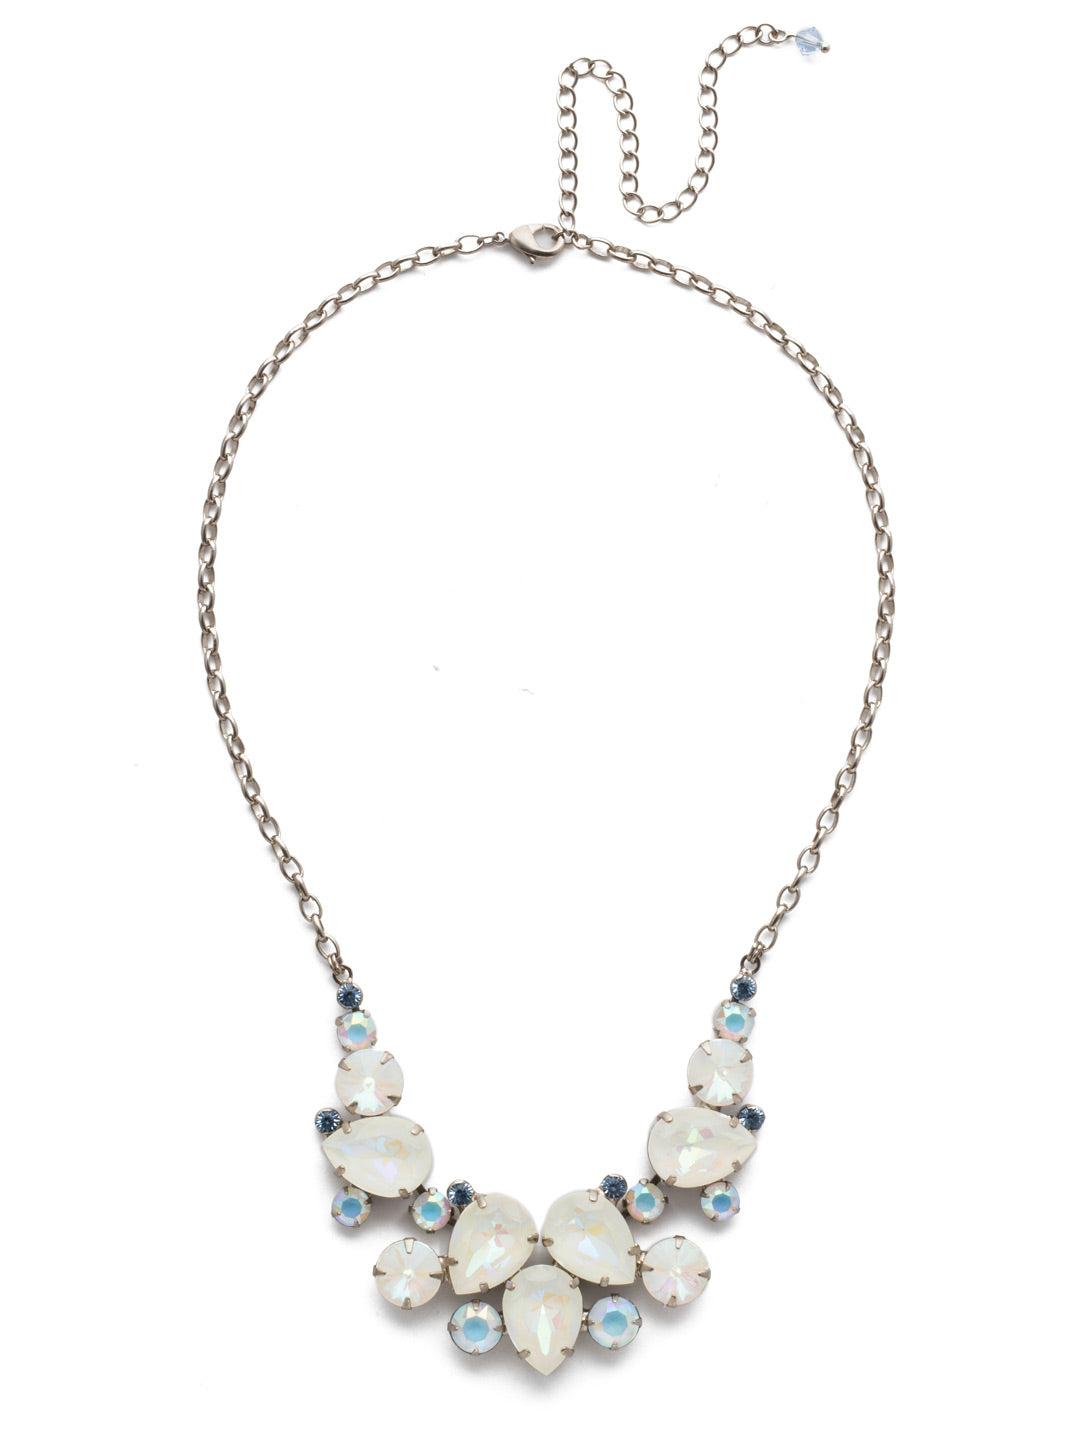 Nested Pear Statement Necklace - NDJ14ASGLC - Our Nested Pear Statement Necklace is the perfect addition to any outfit. With a lot of sparkle packed into a sleek unique crystal necklace, sport this style to any and all of life's occasions! From Sorrelli's Glacier collection in our Antique Silver-tone finish.